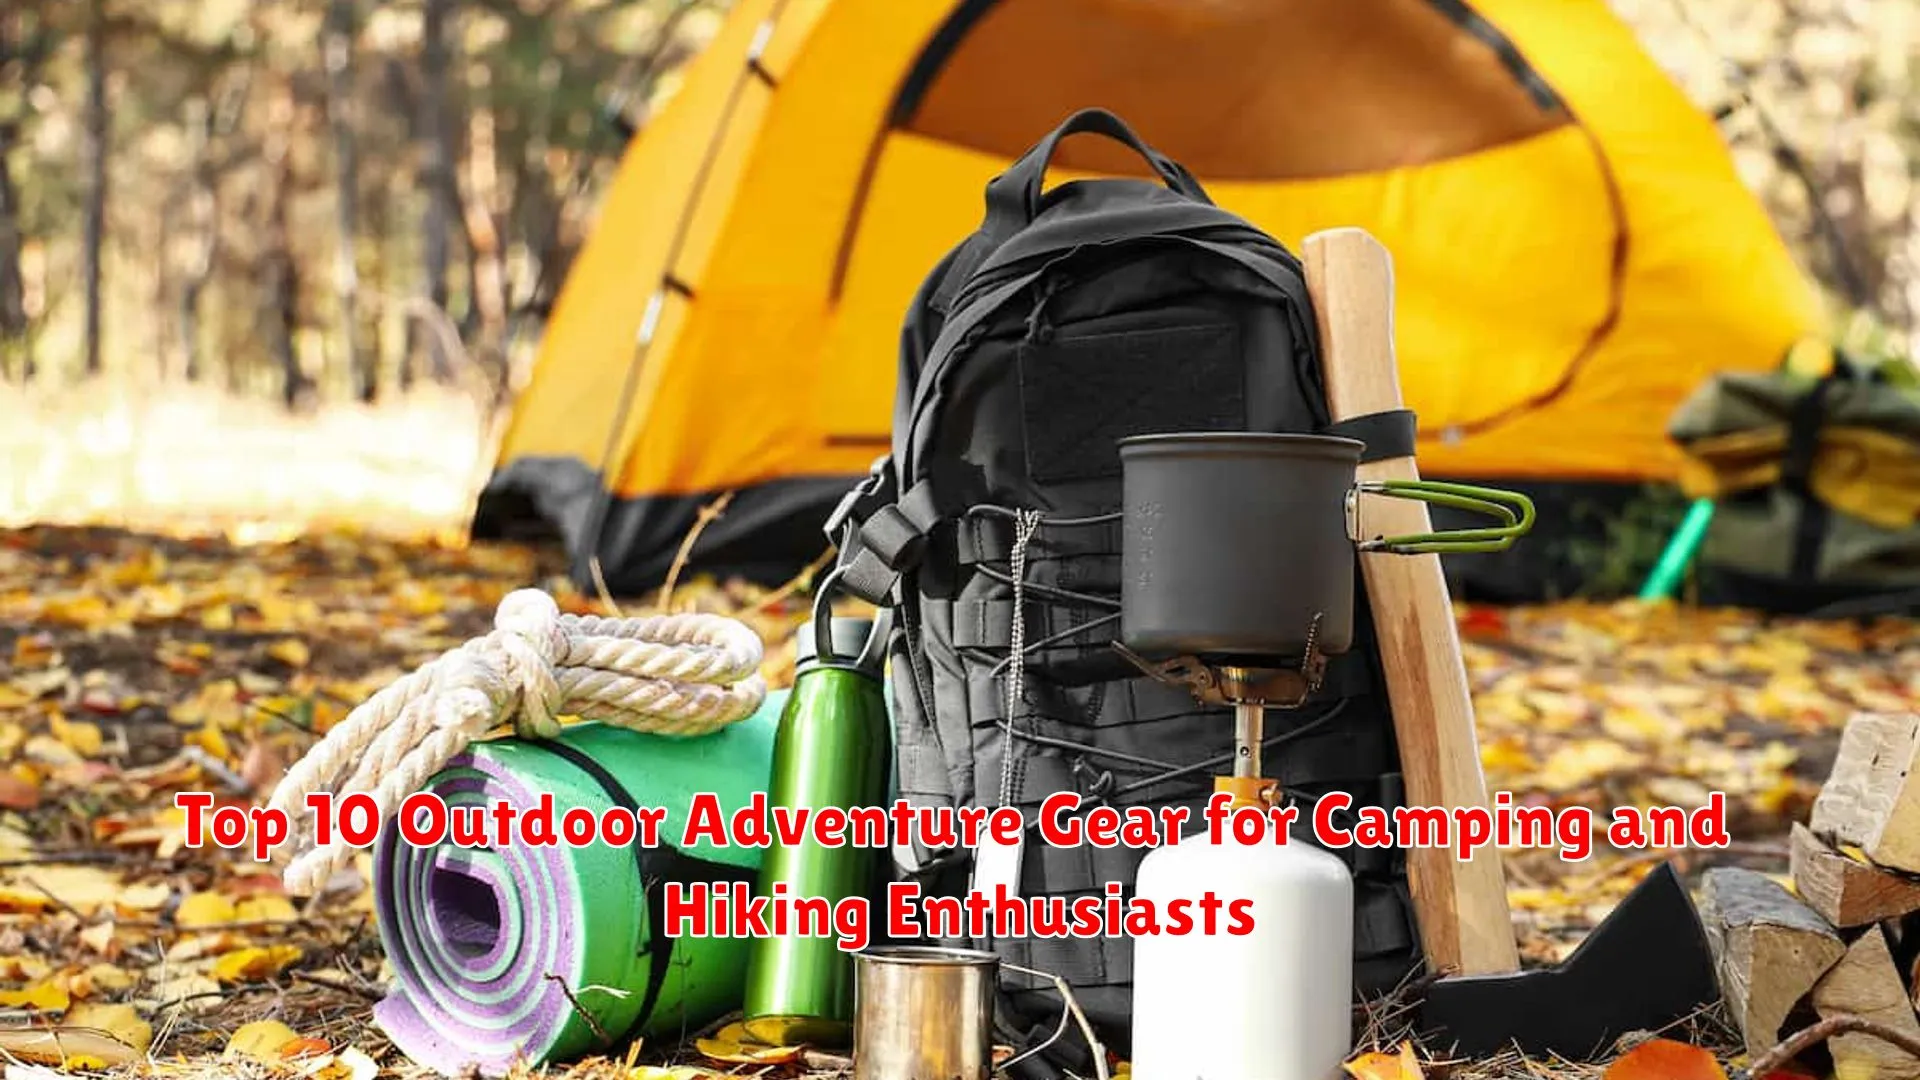 Top 10 Outdoor Adventure Gear for Camping and Hiking Enthusiasts